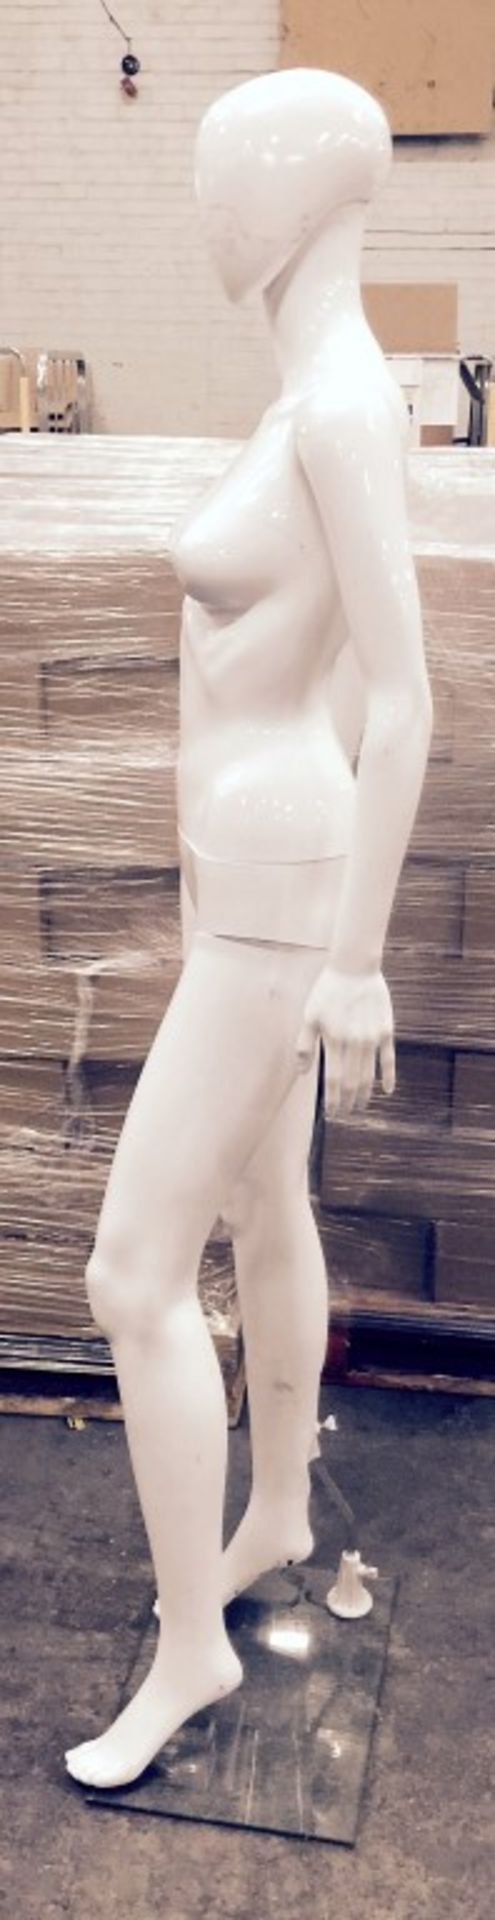 1 x Female Full Body Mannequin – Life Size Faceless Adult Form With Adjustable Head and Arms – White - Image 2 of 4